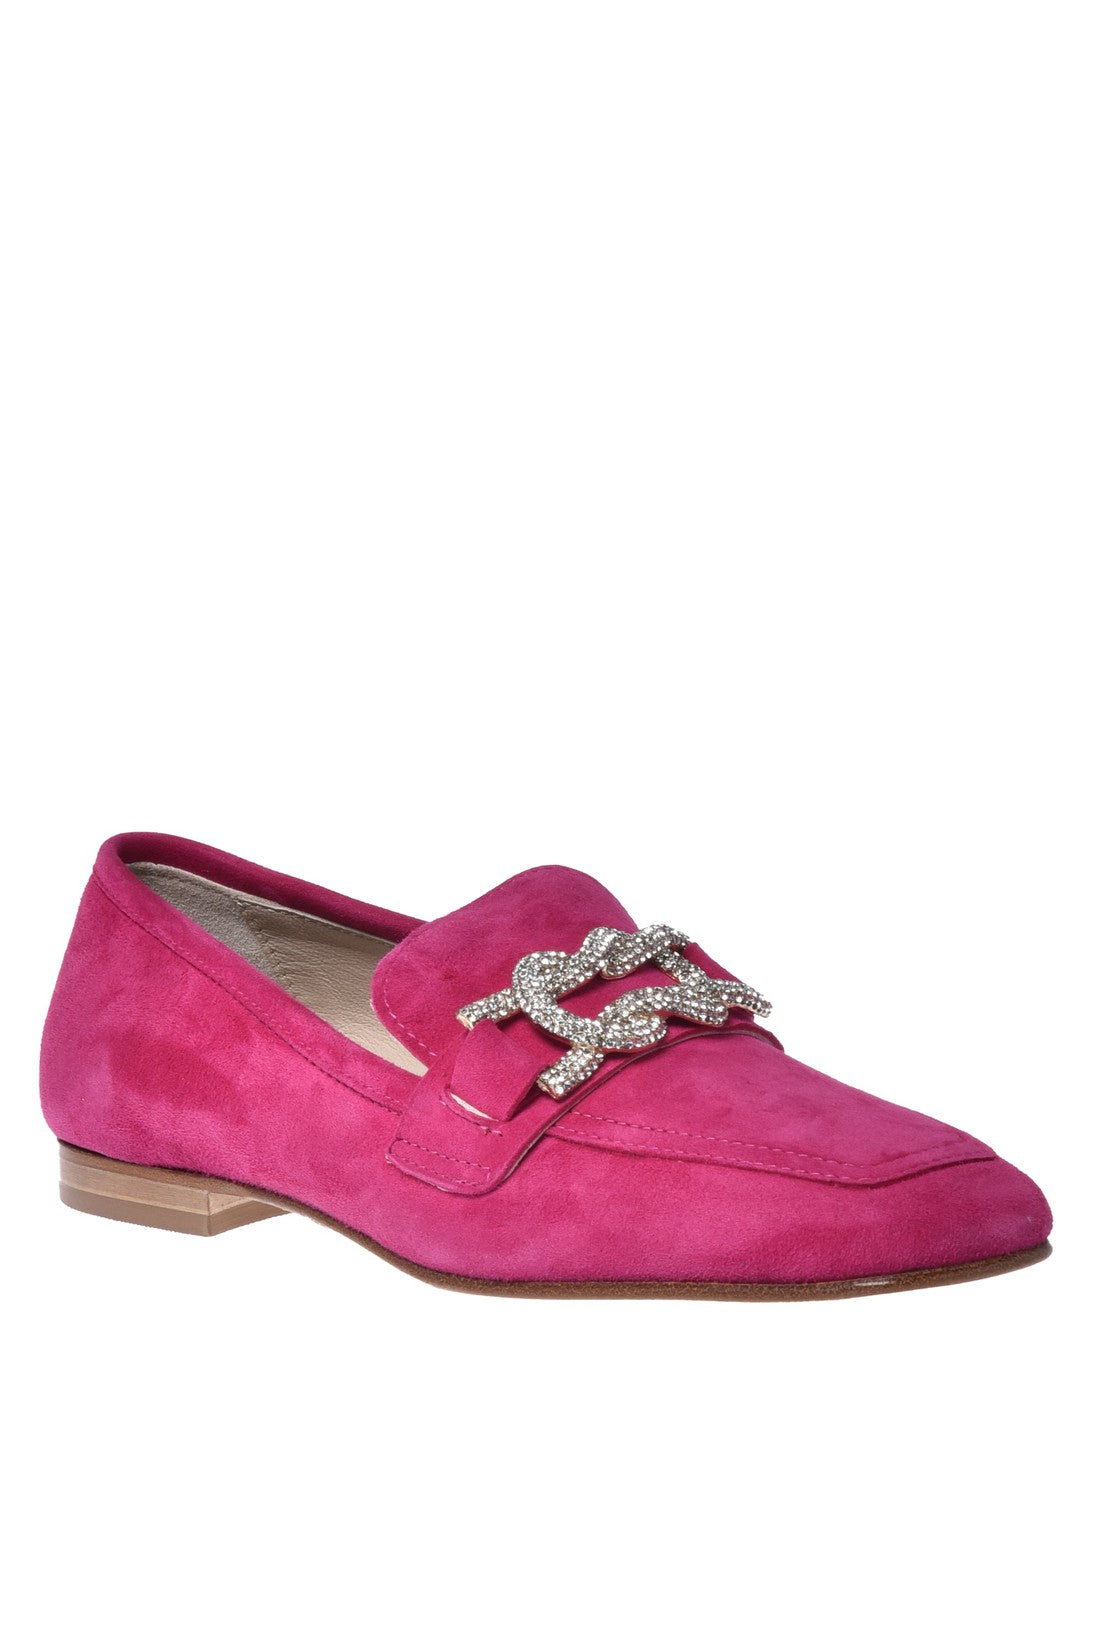 BALDININI-OUTLET-SALE-Loafer-in-fuchsia-suede-Halbschuhe-35-ARCHIVE-COLLECTION.jpg